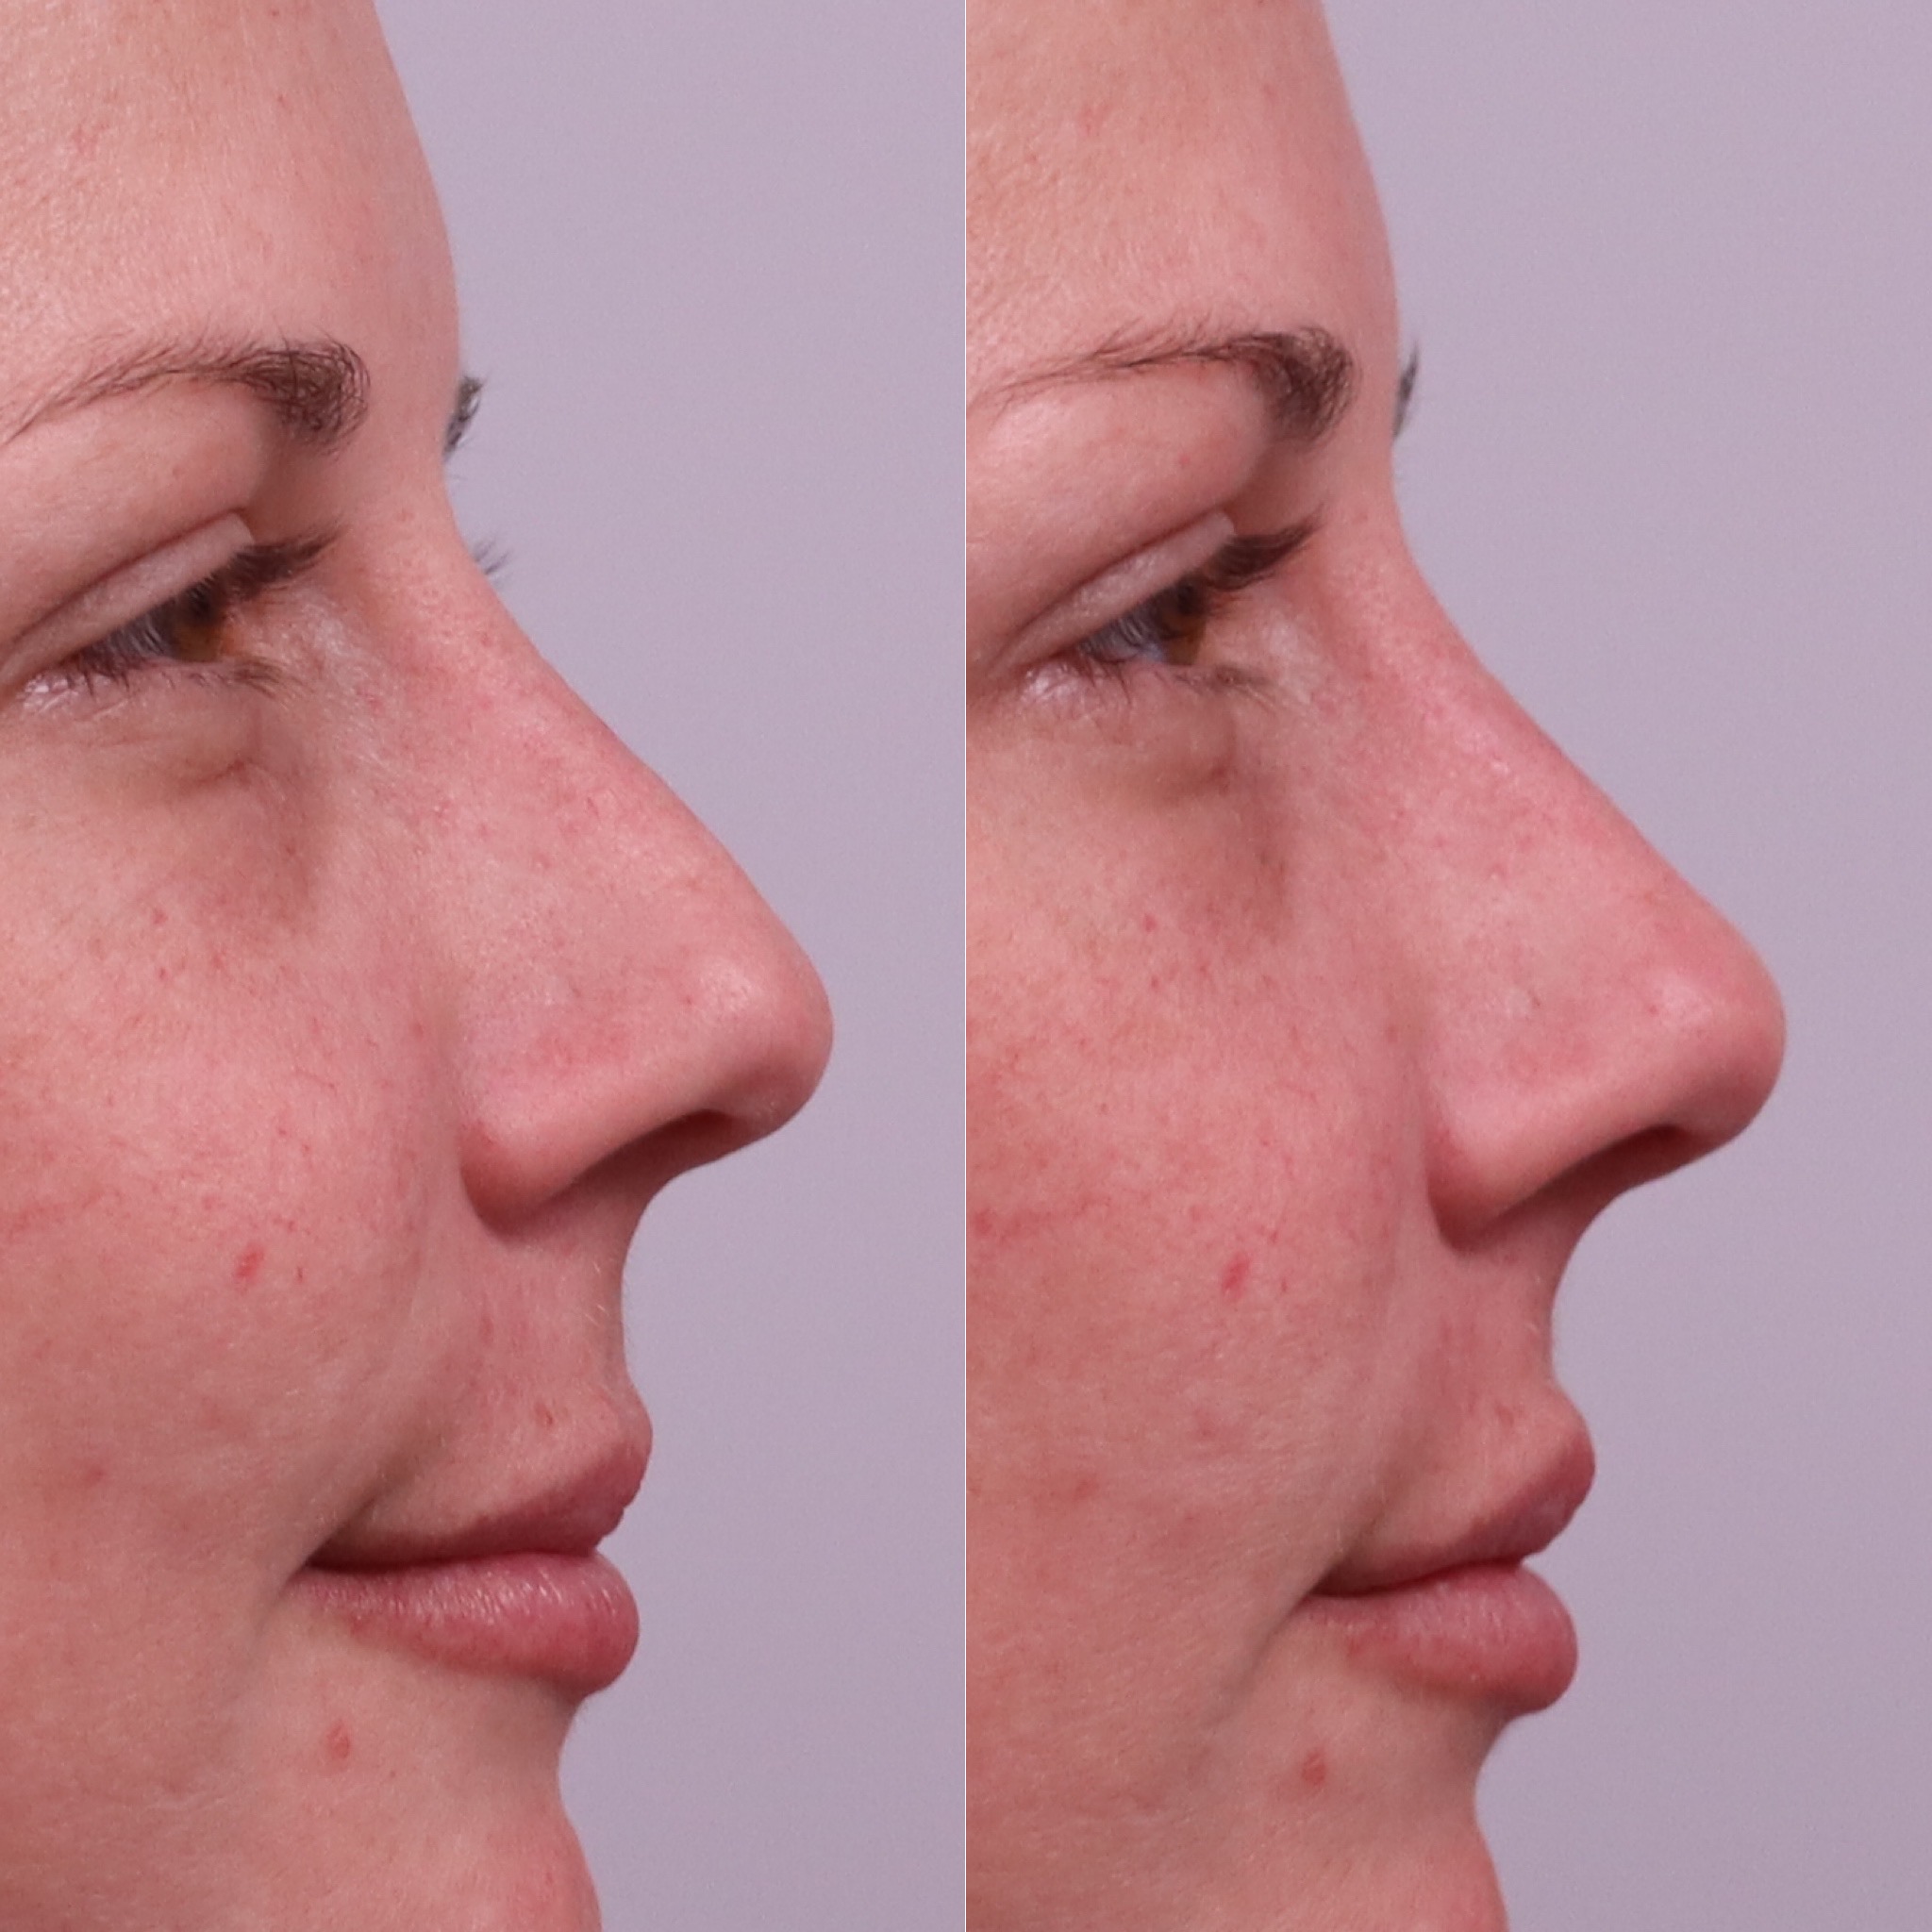 Before and after nose filler photographs